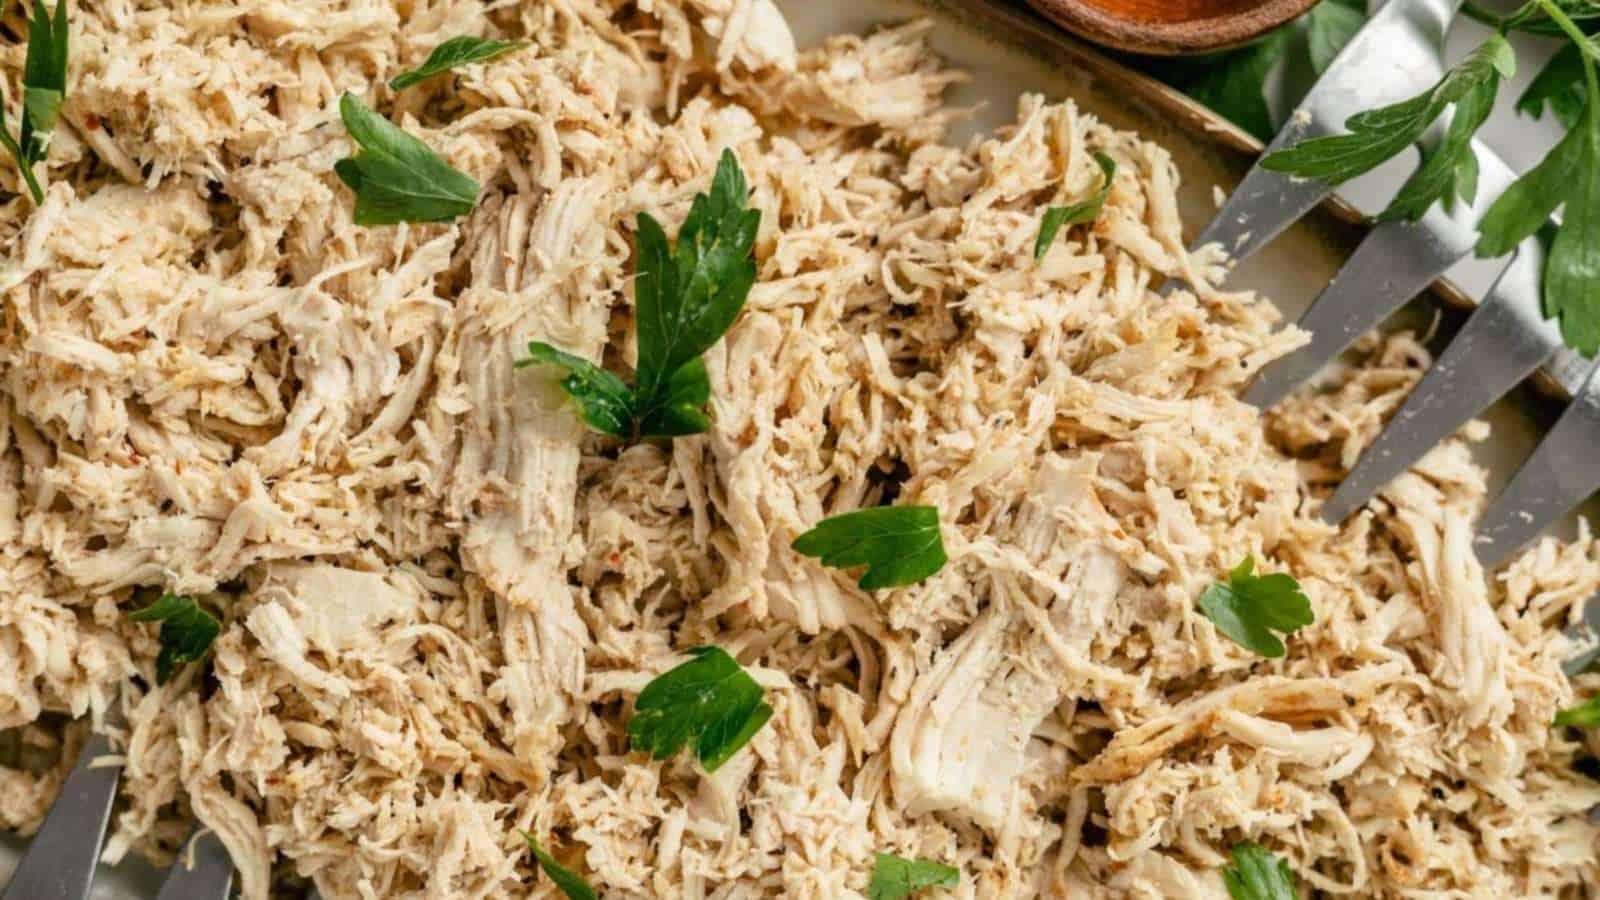 Shredded chicken on a baking sheet with forks.